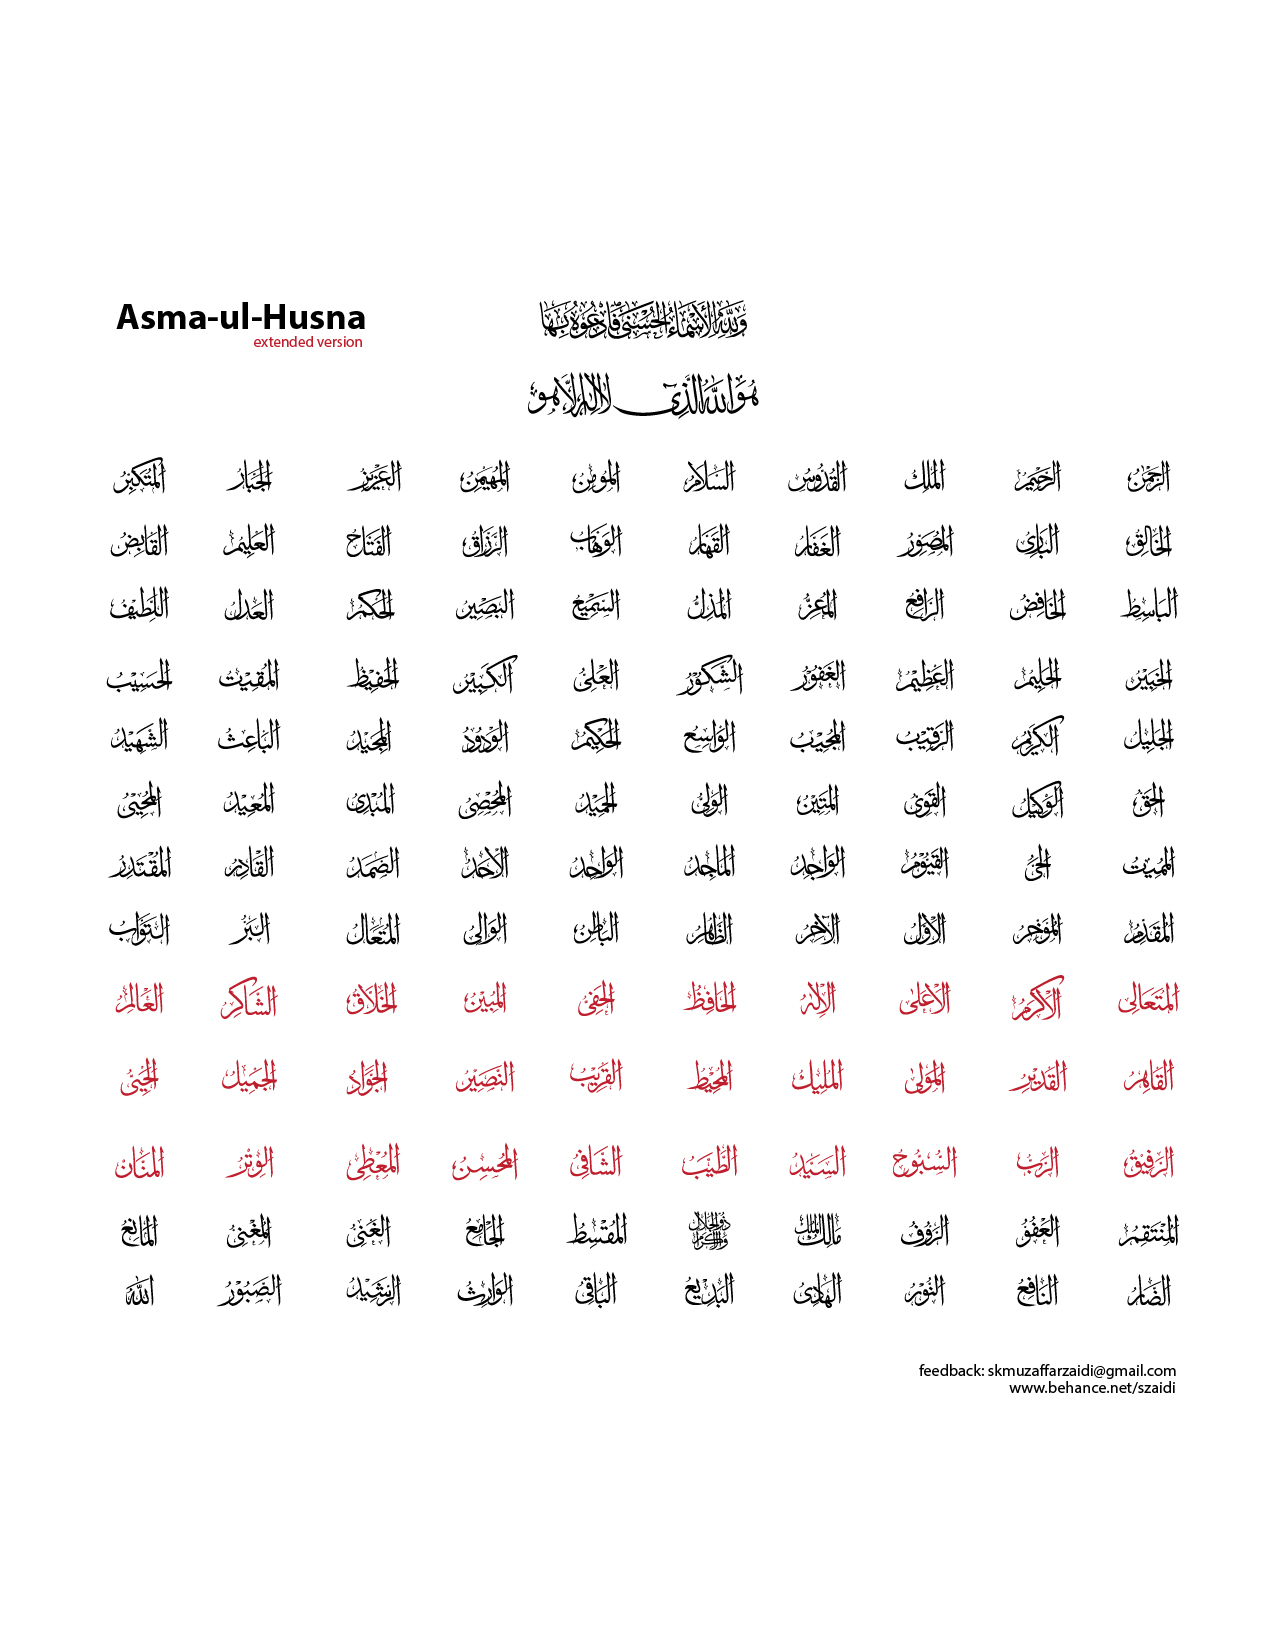 99-names-of-allah-vector-extended-version-by-szaidi-on-deviantart